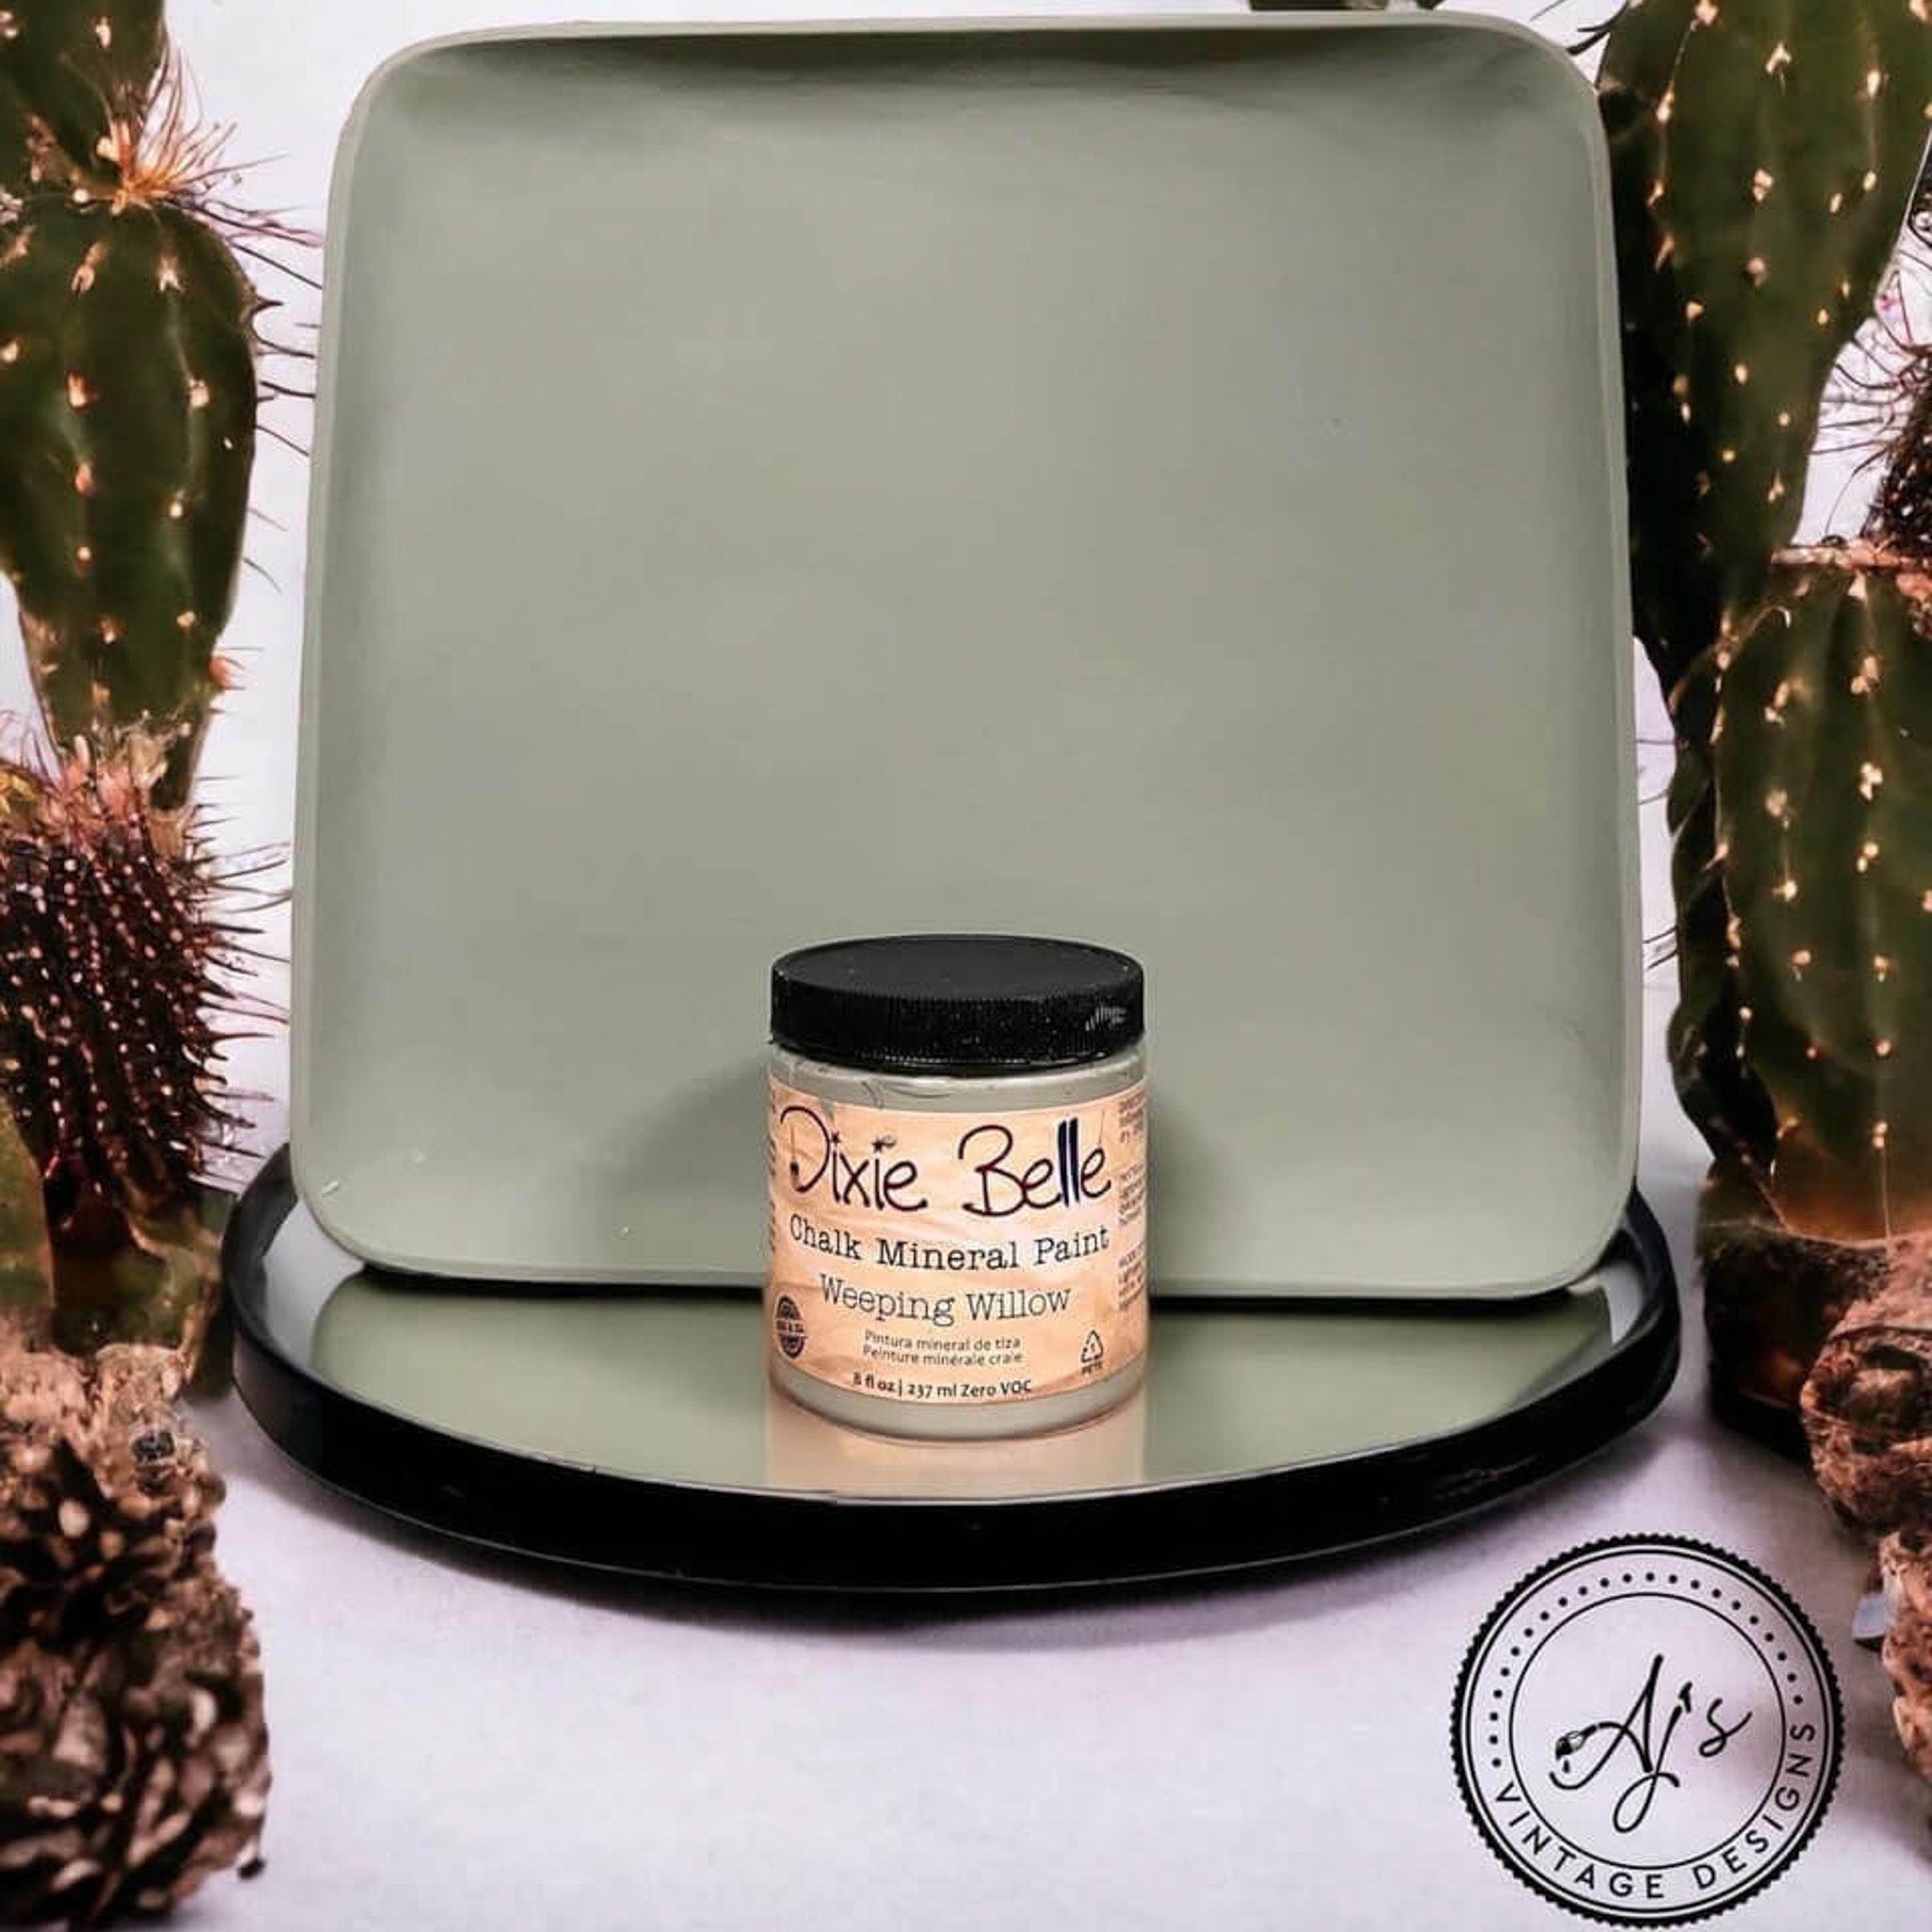 A square wood tray refurbished by Aj's Vintage Designs  is painted in Dixie Belle's Weeping Willow chalk mineral paint. The tray is sat up on end with a container of Dixie Belle's Weeping Willow chalk mineral paint in front of it and they are surrounded by catus.